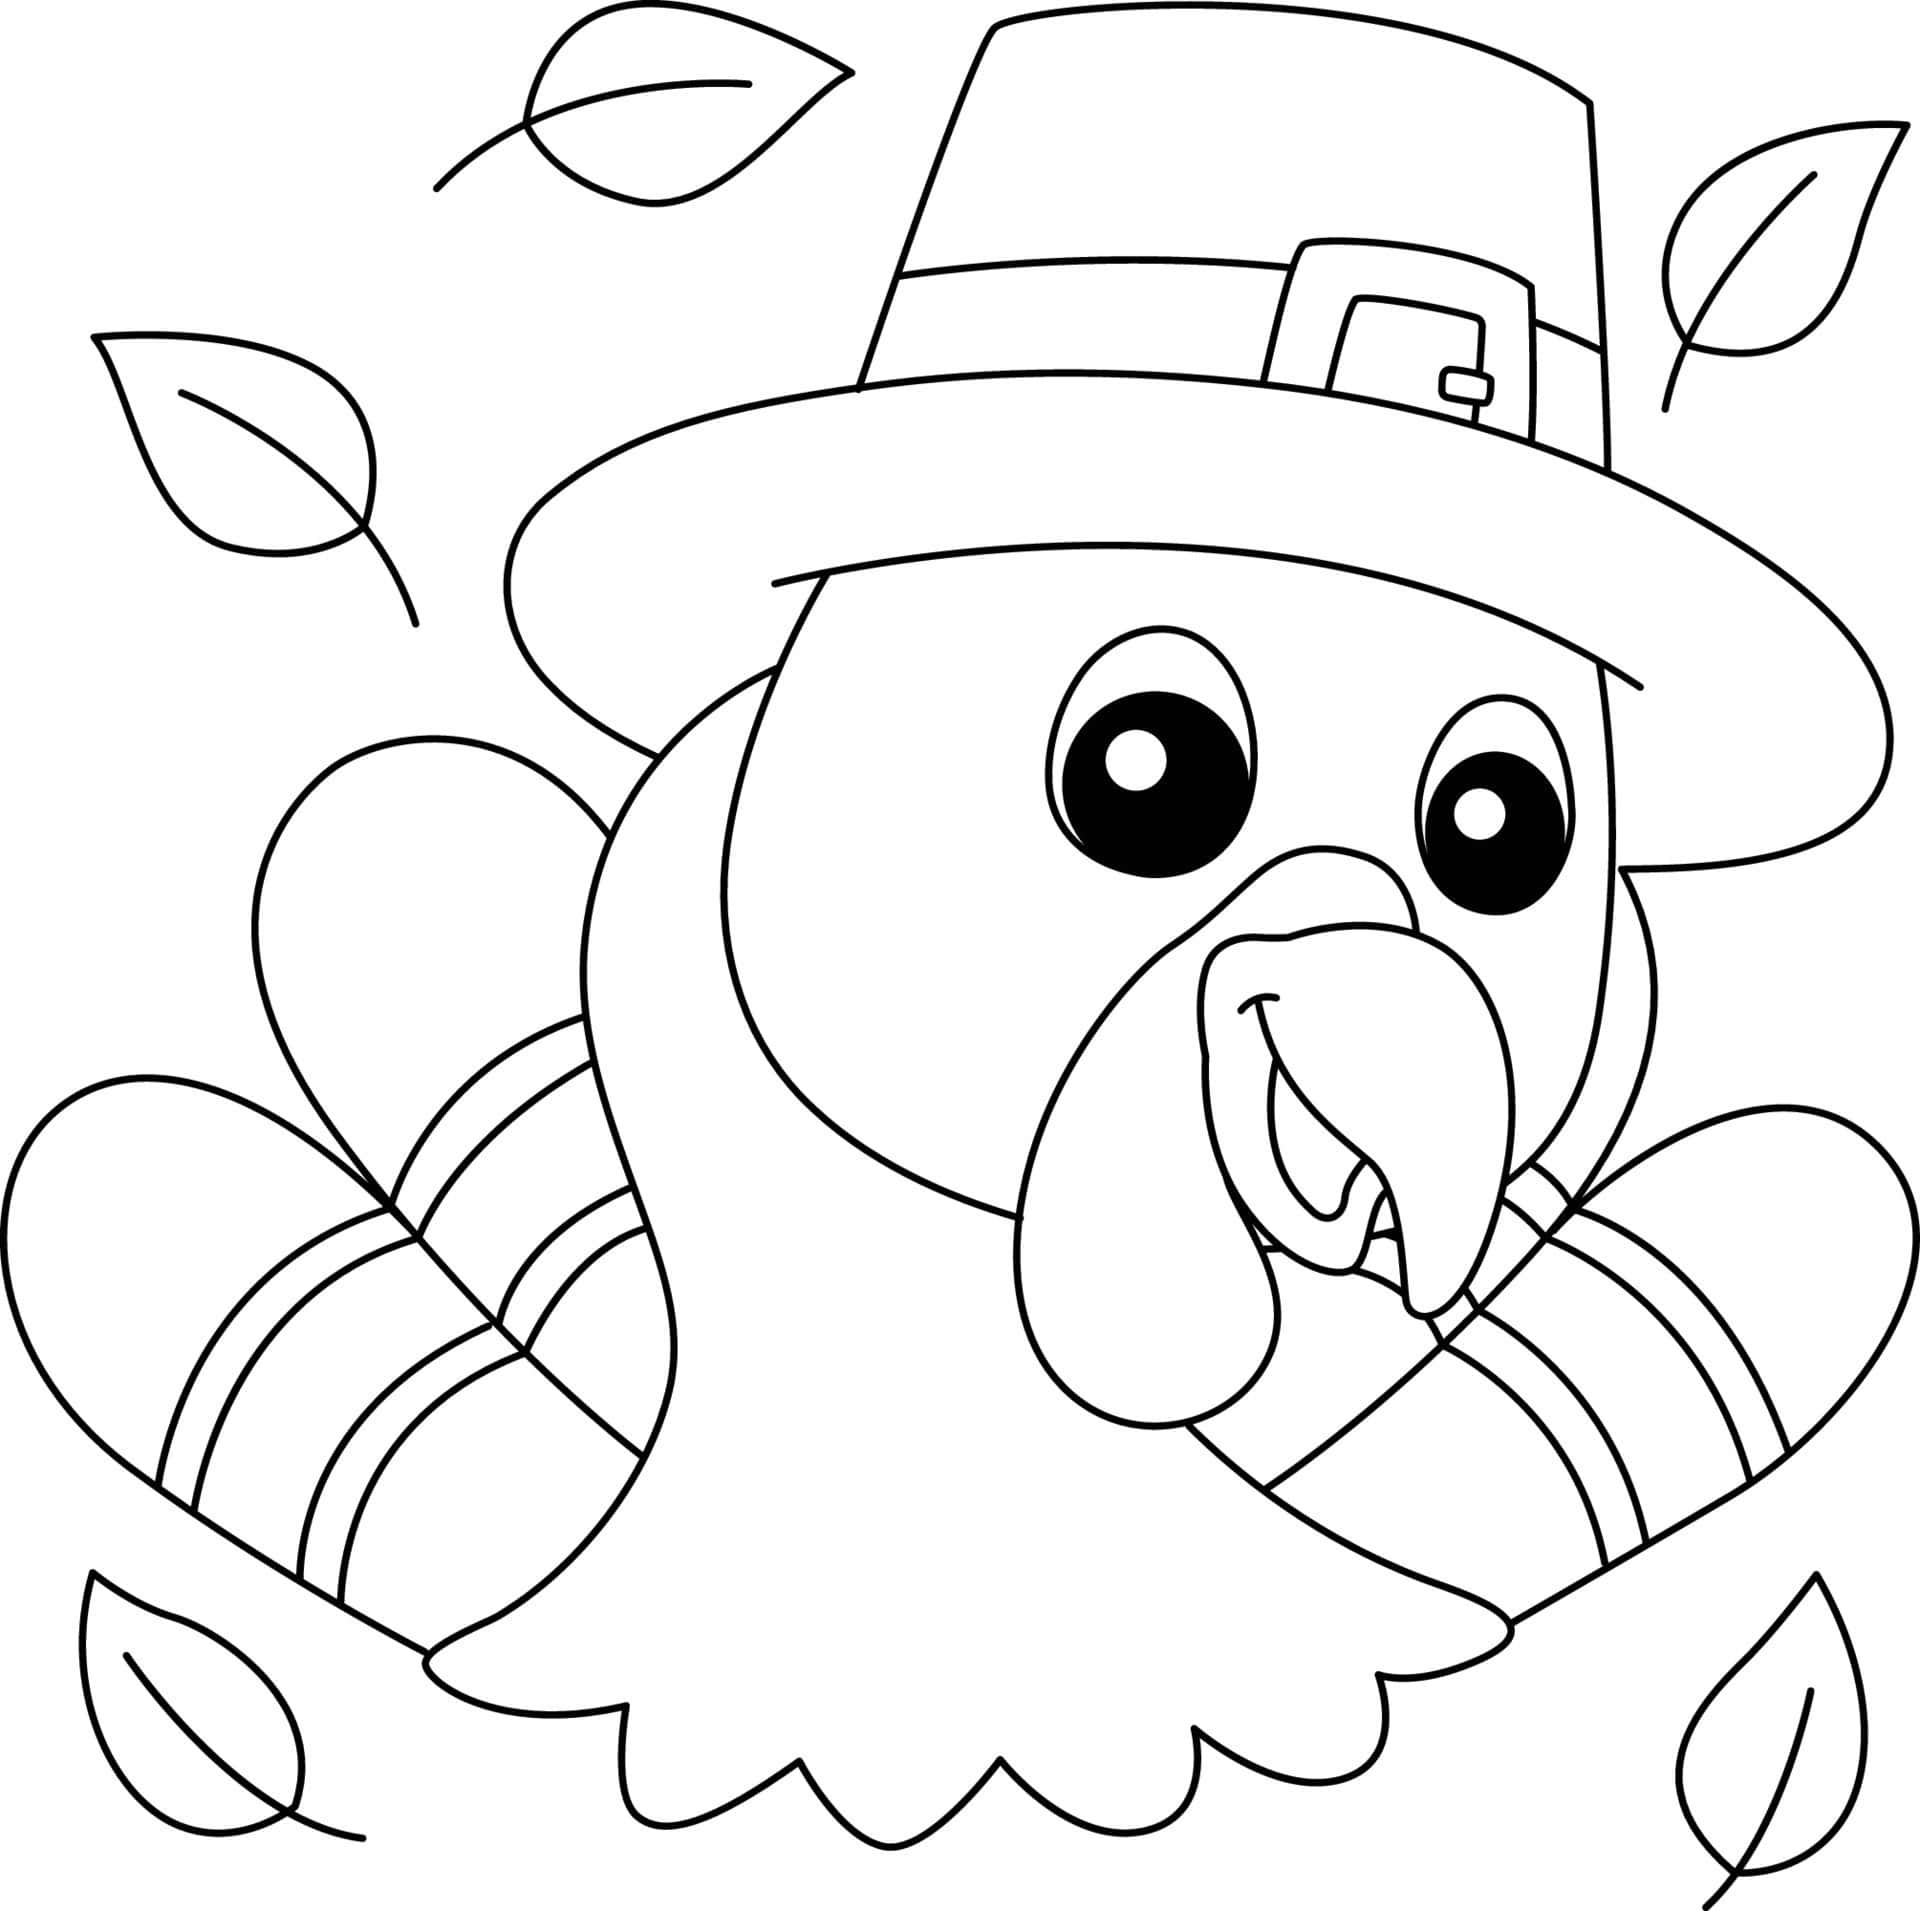 Get Your Children Ready for Thanksgiving with a Turkey Coloring Activity